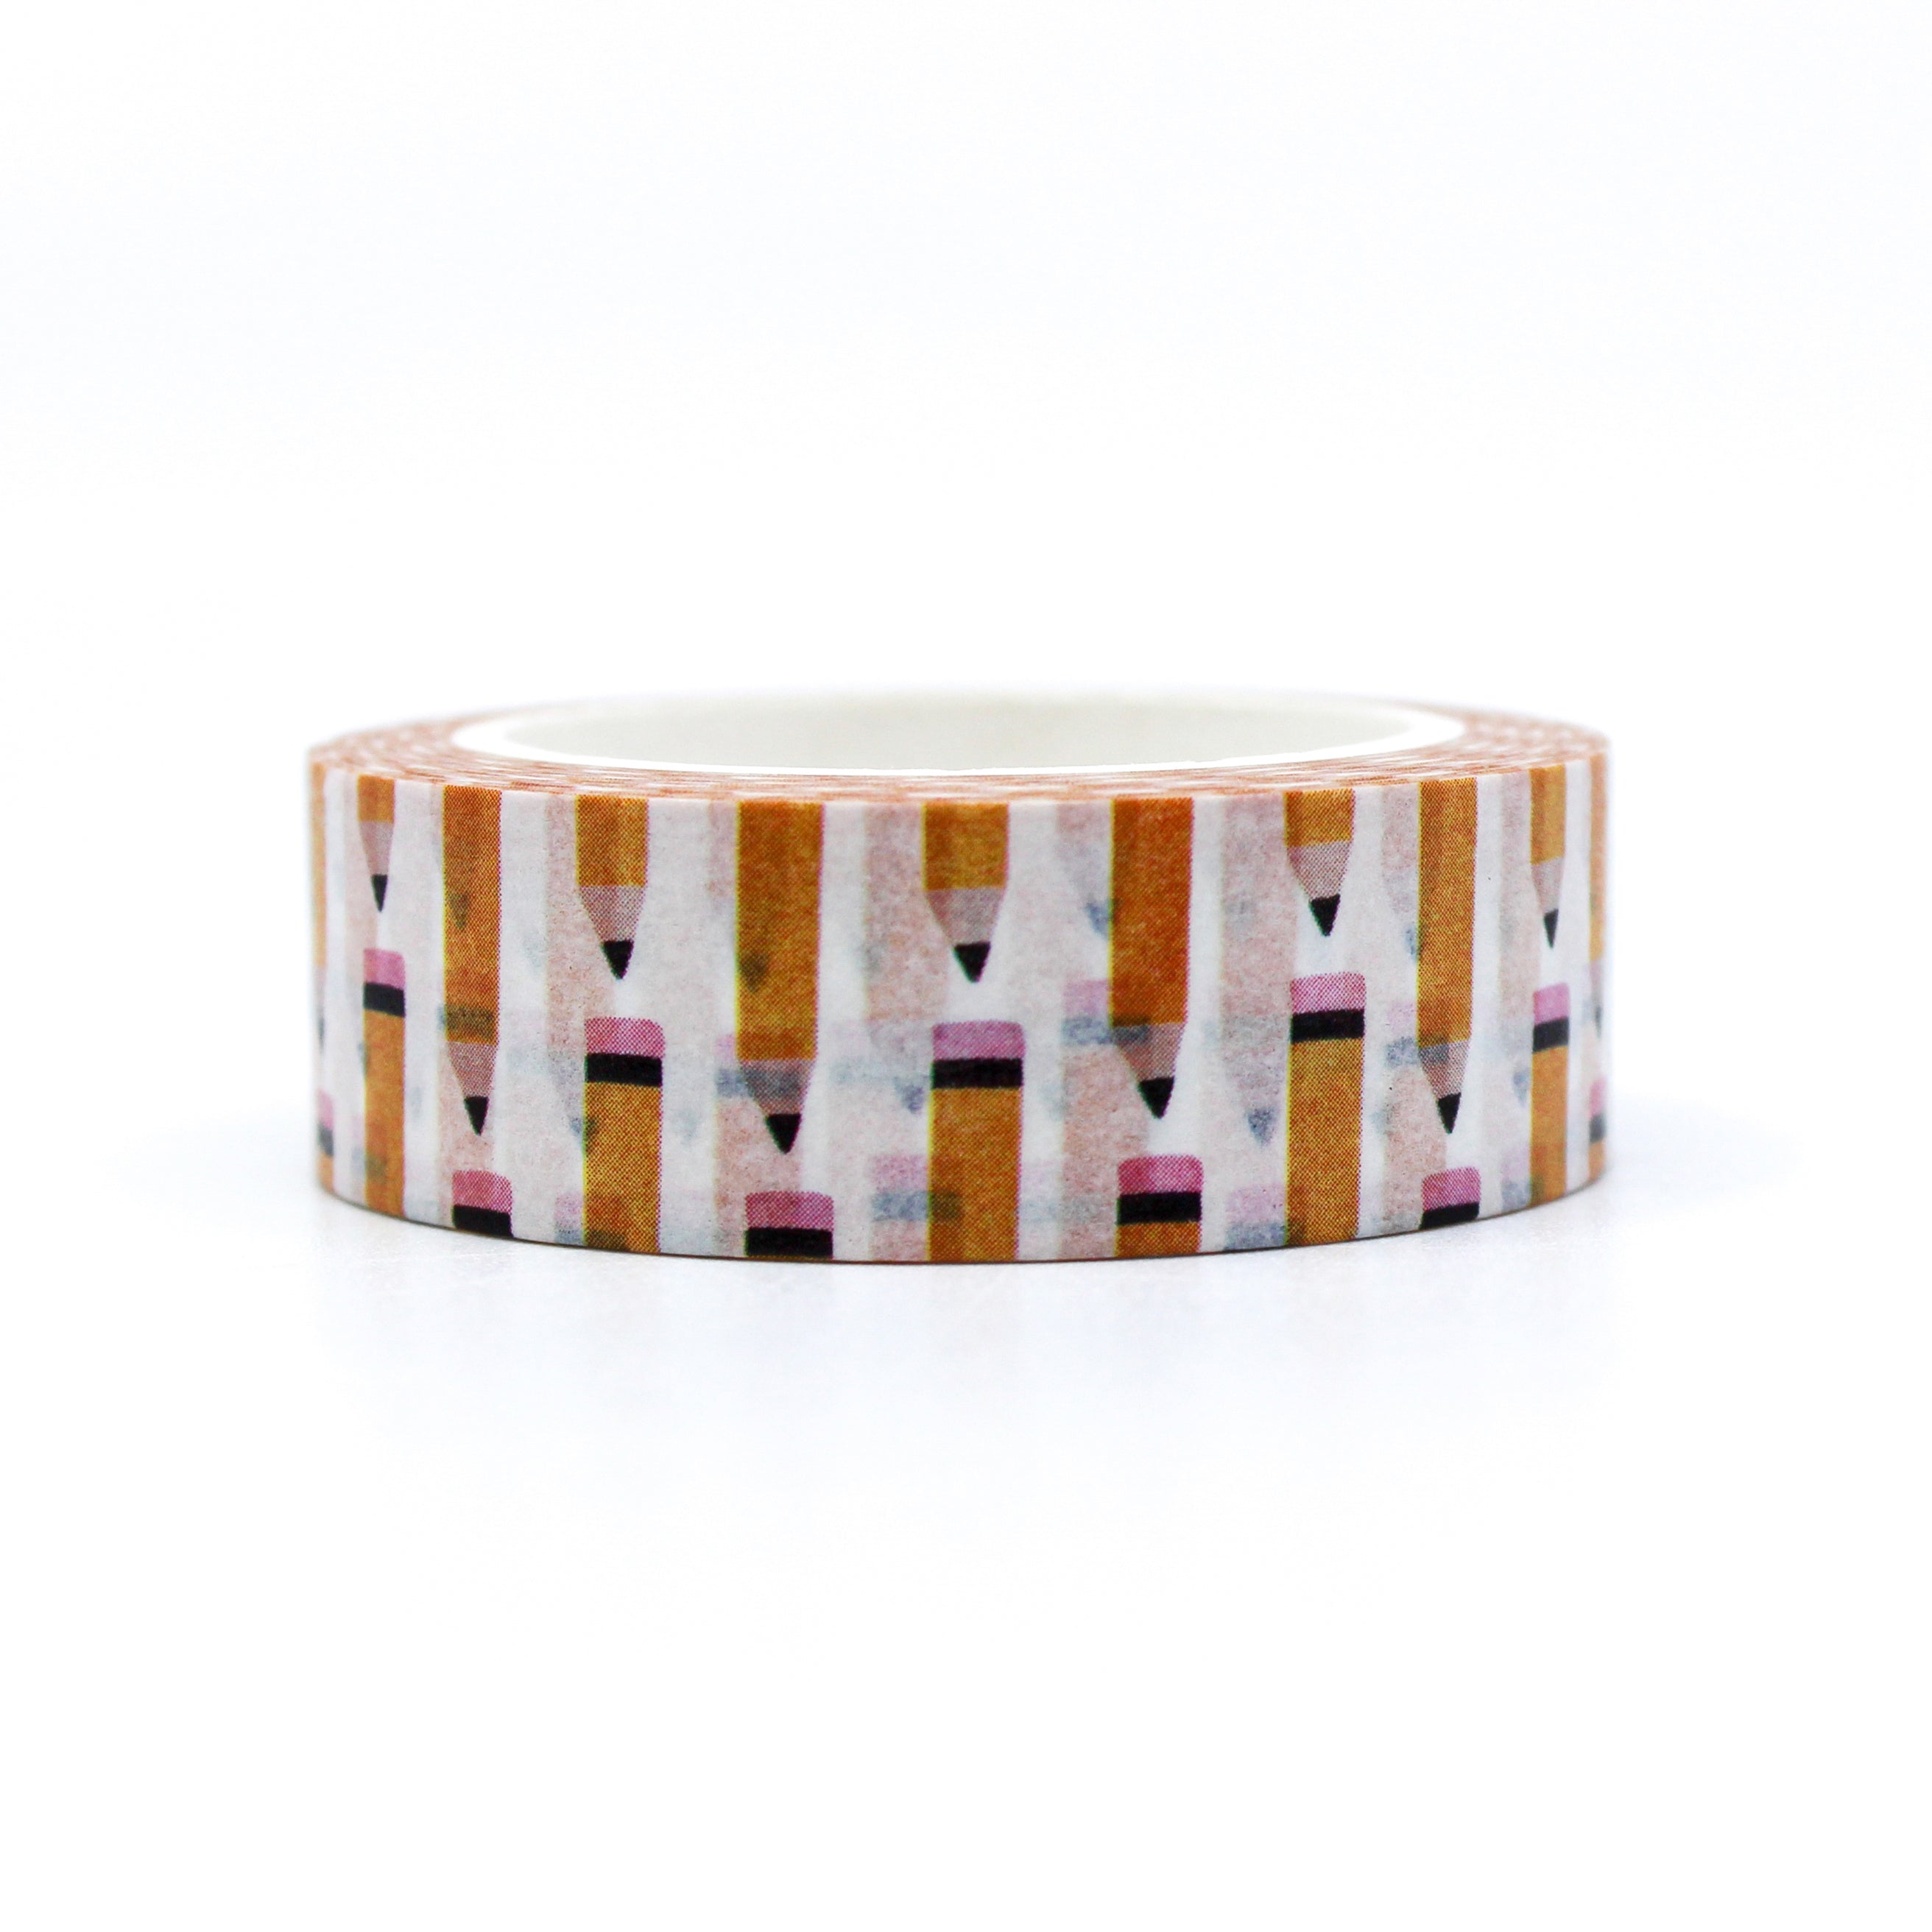 This is a yellow pencil washi tape from BBB Supplies Craft Shop